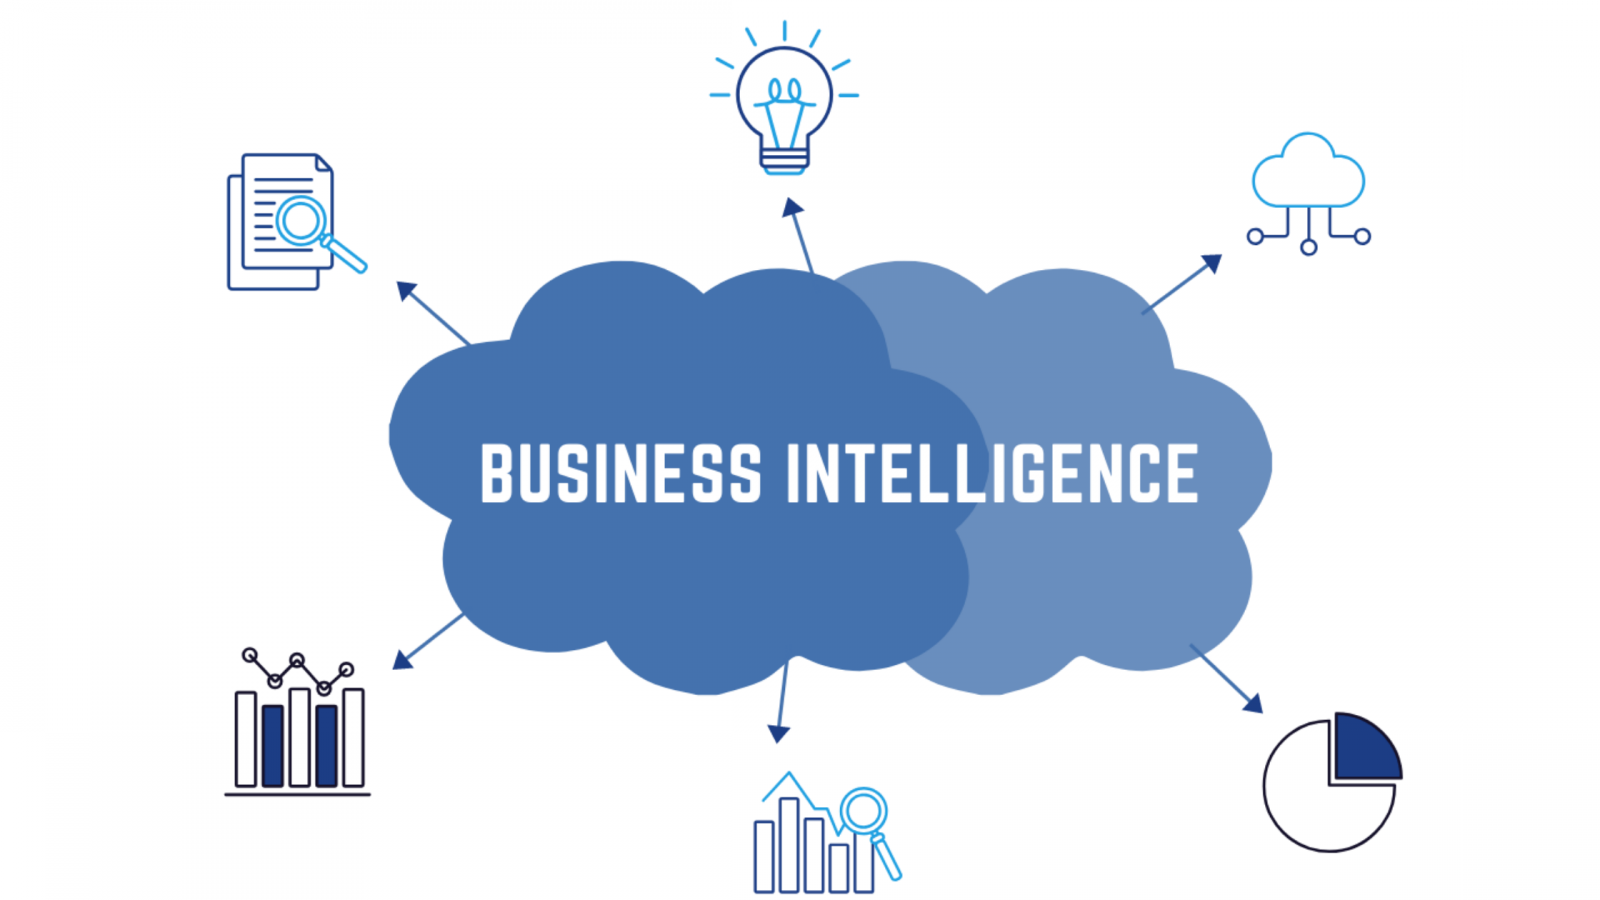 What is Business Intelligence? Why do businesses need special attention?